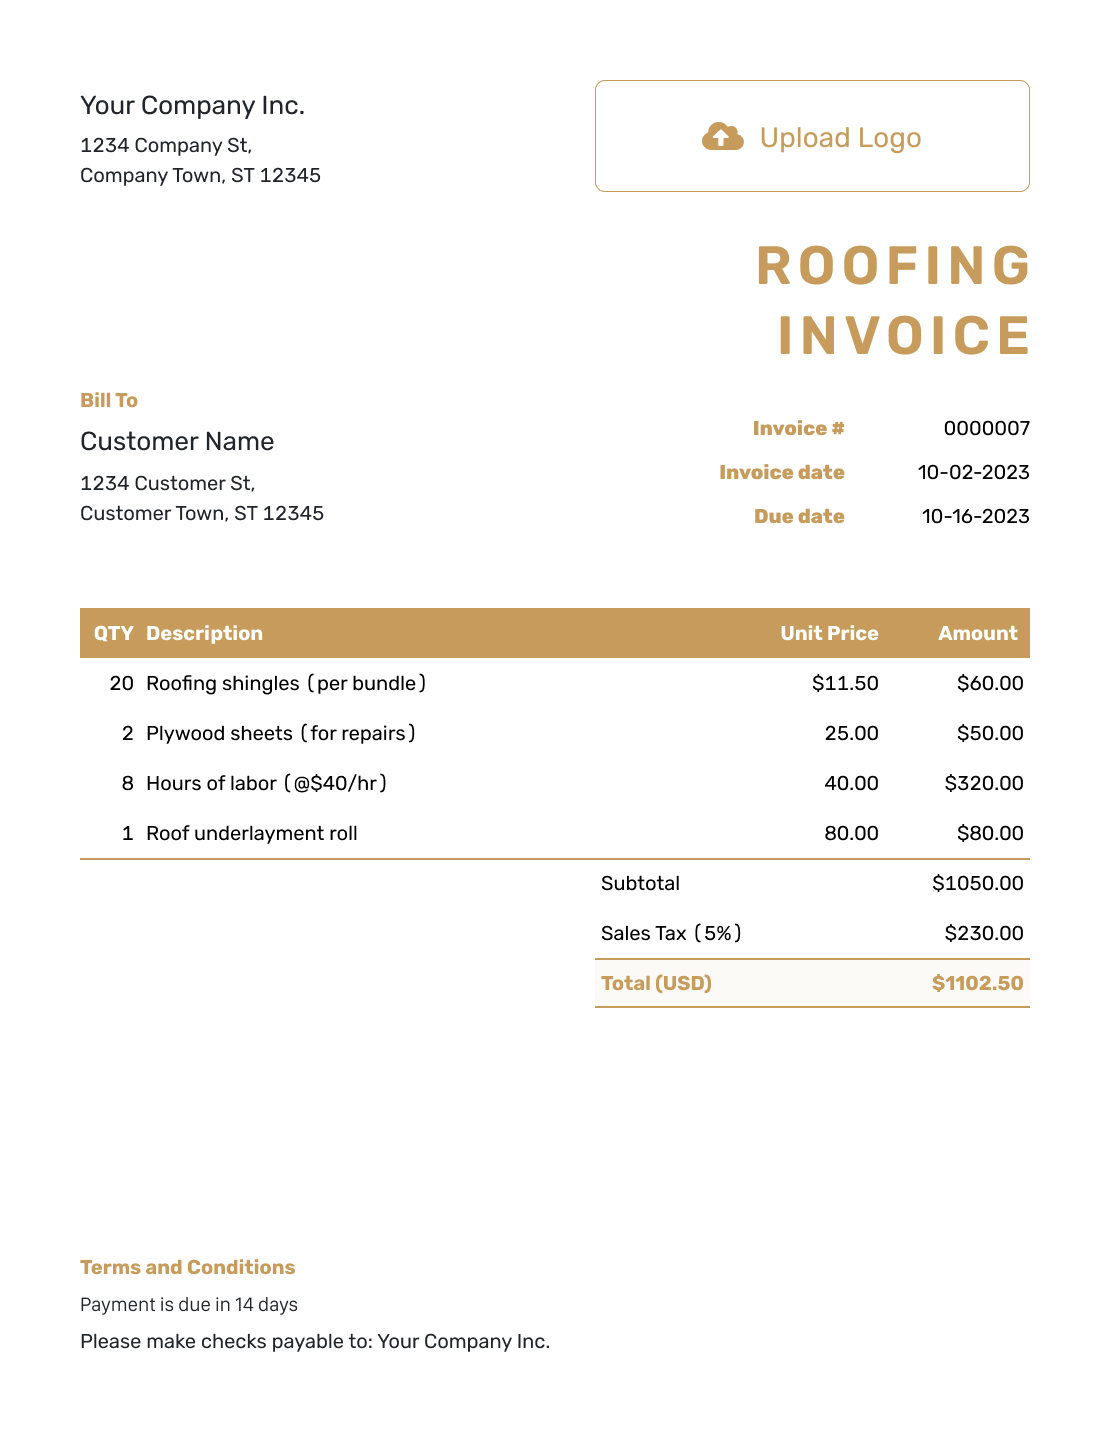 Basic Roofing Invoice Template